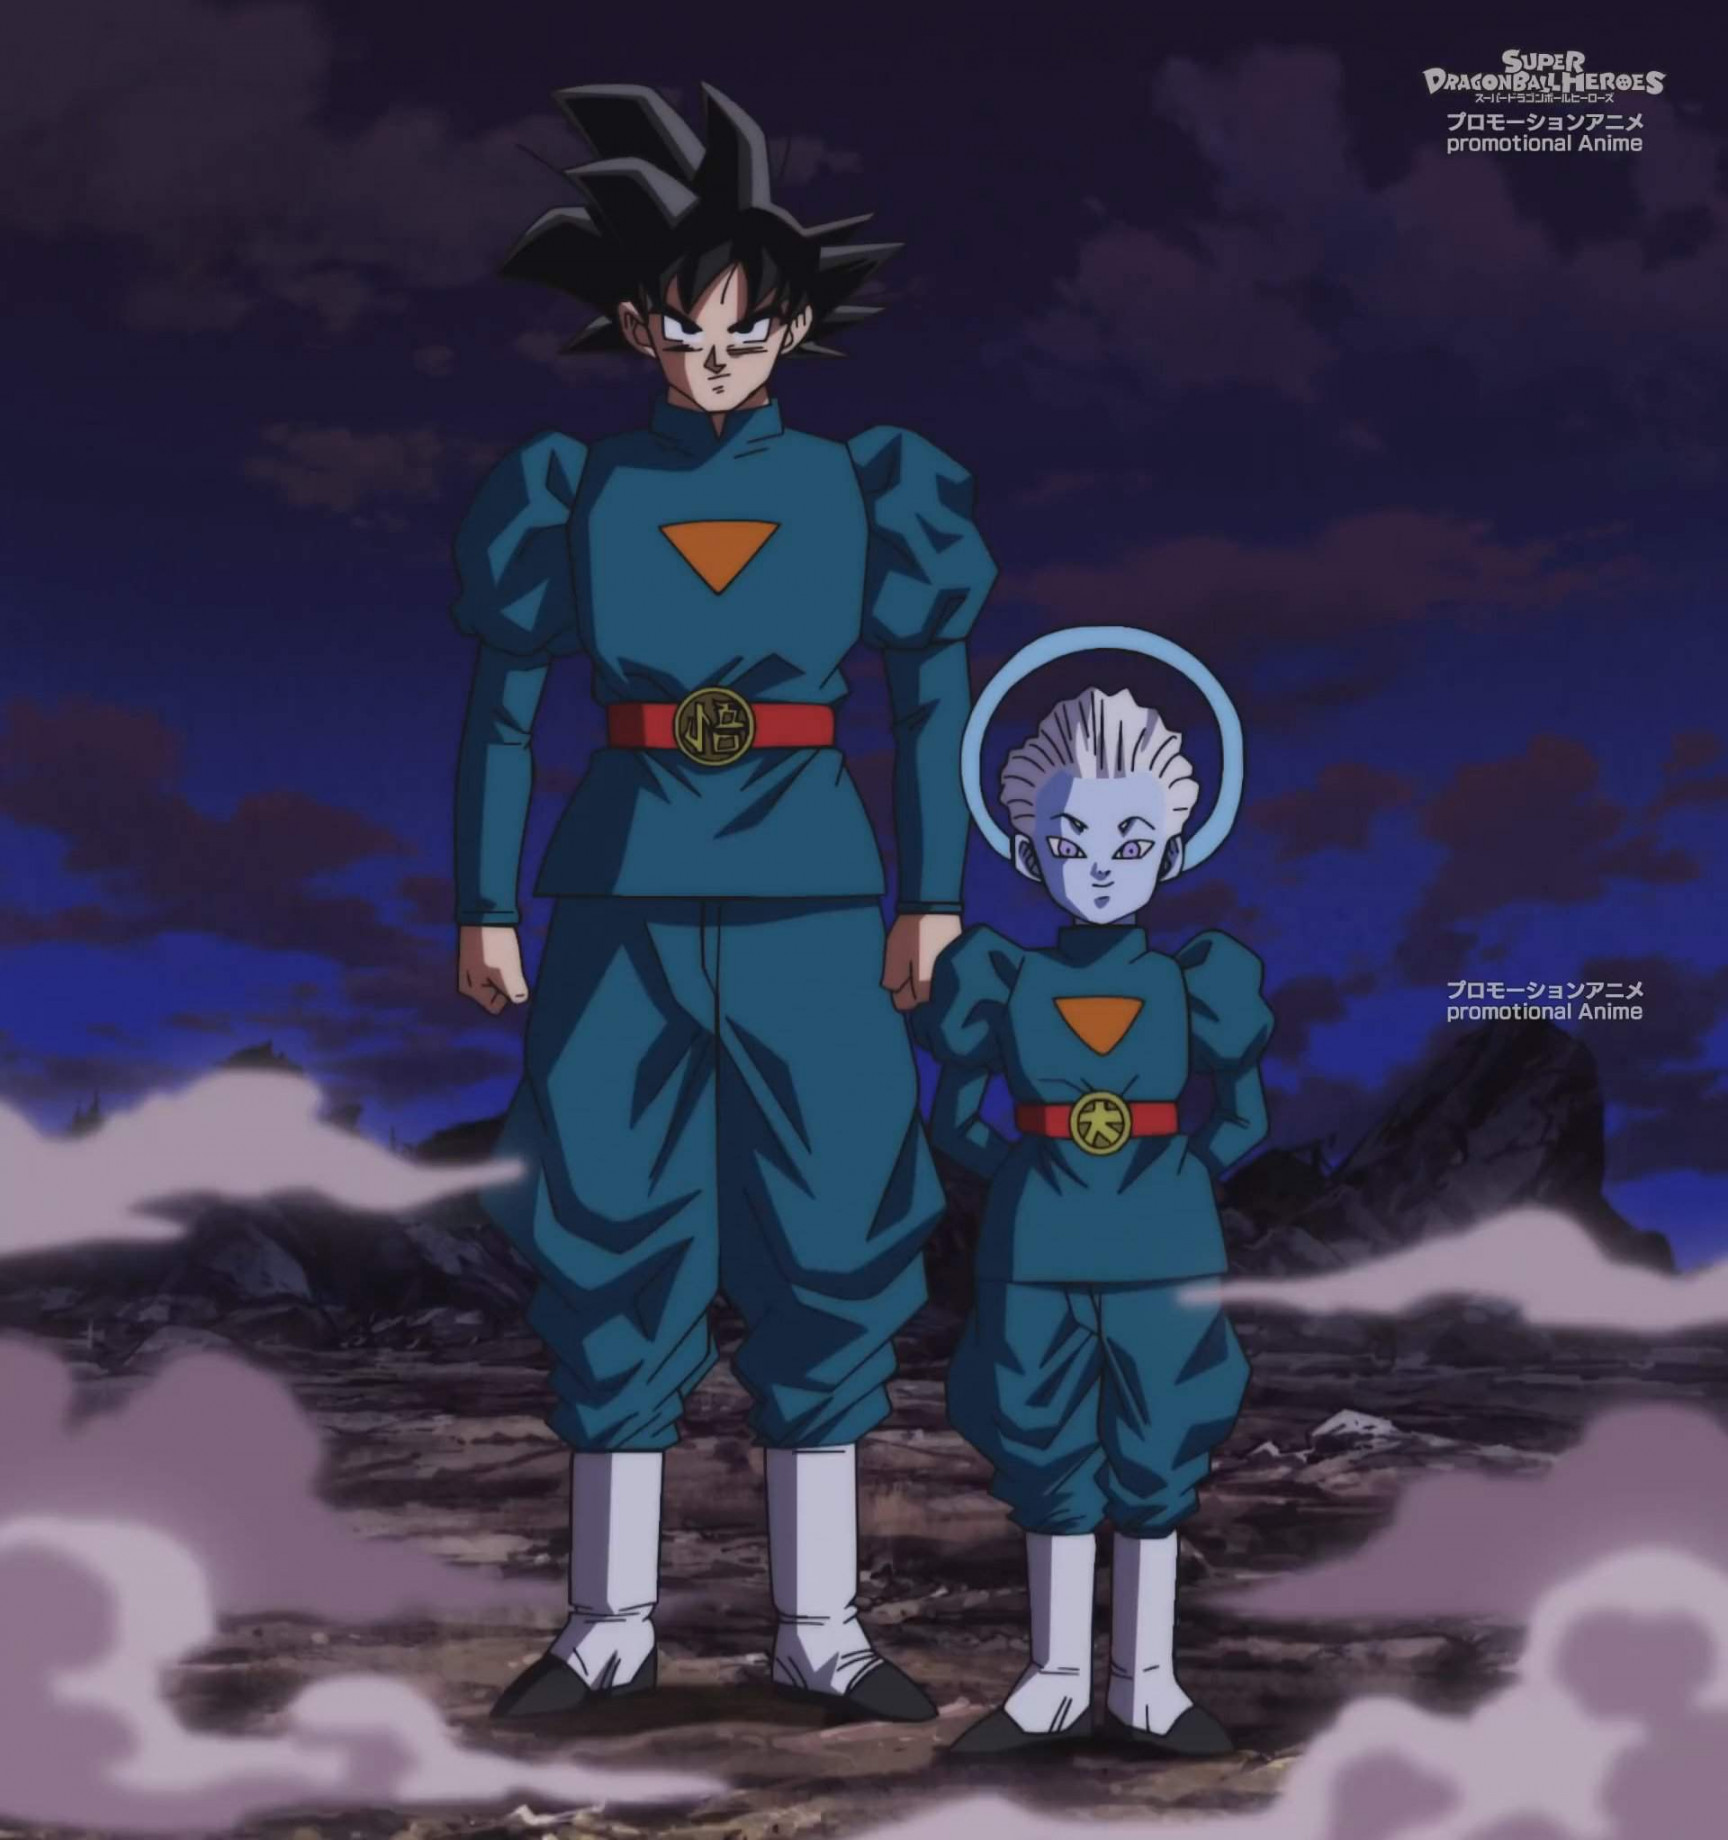 Why do you think the Grand Minister gave Goku HIS clothes? Any